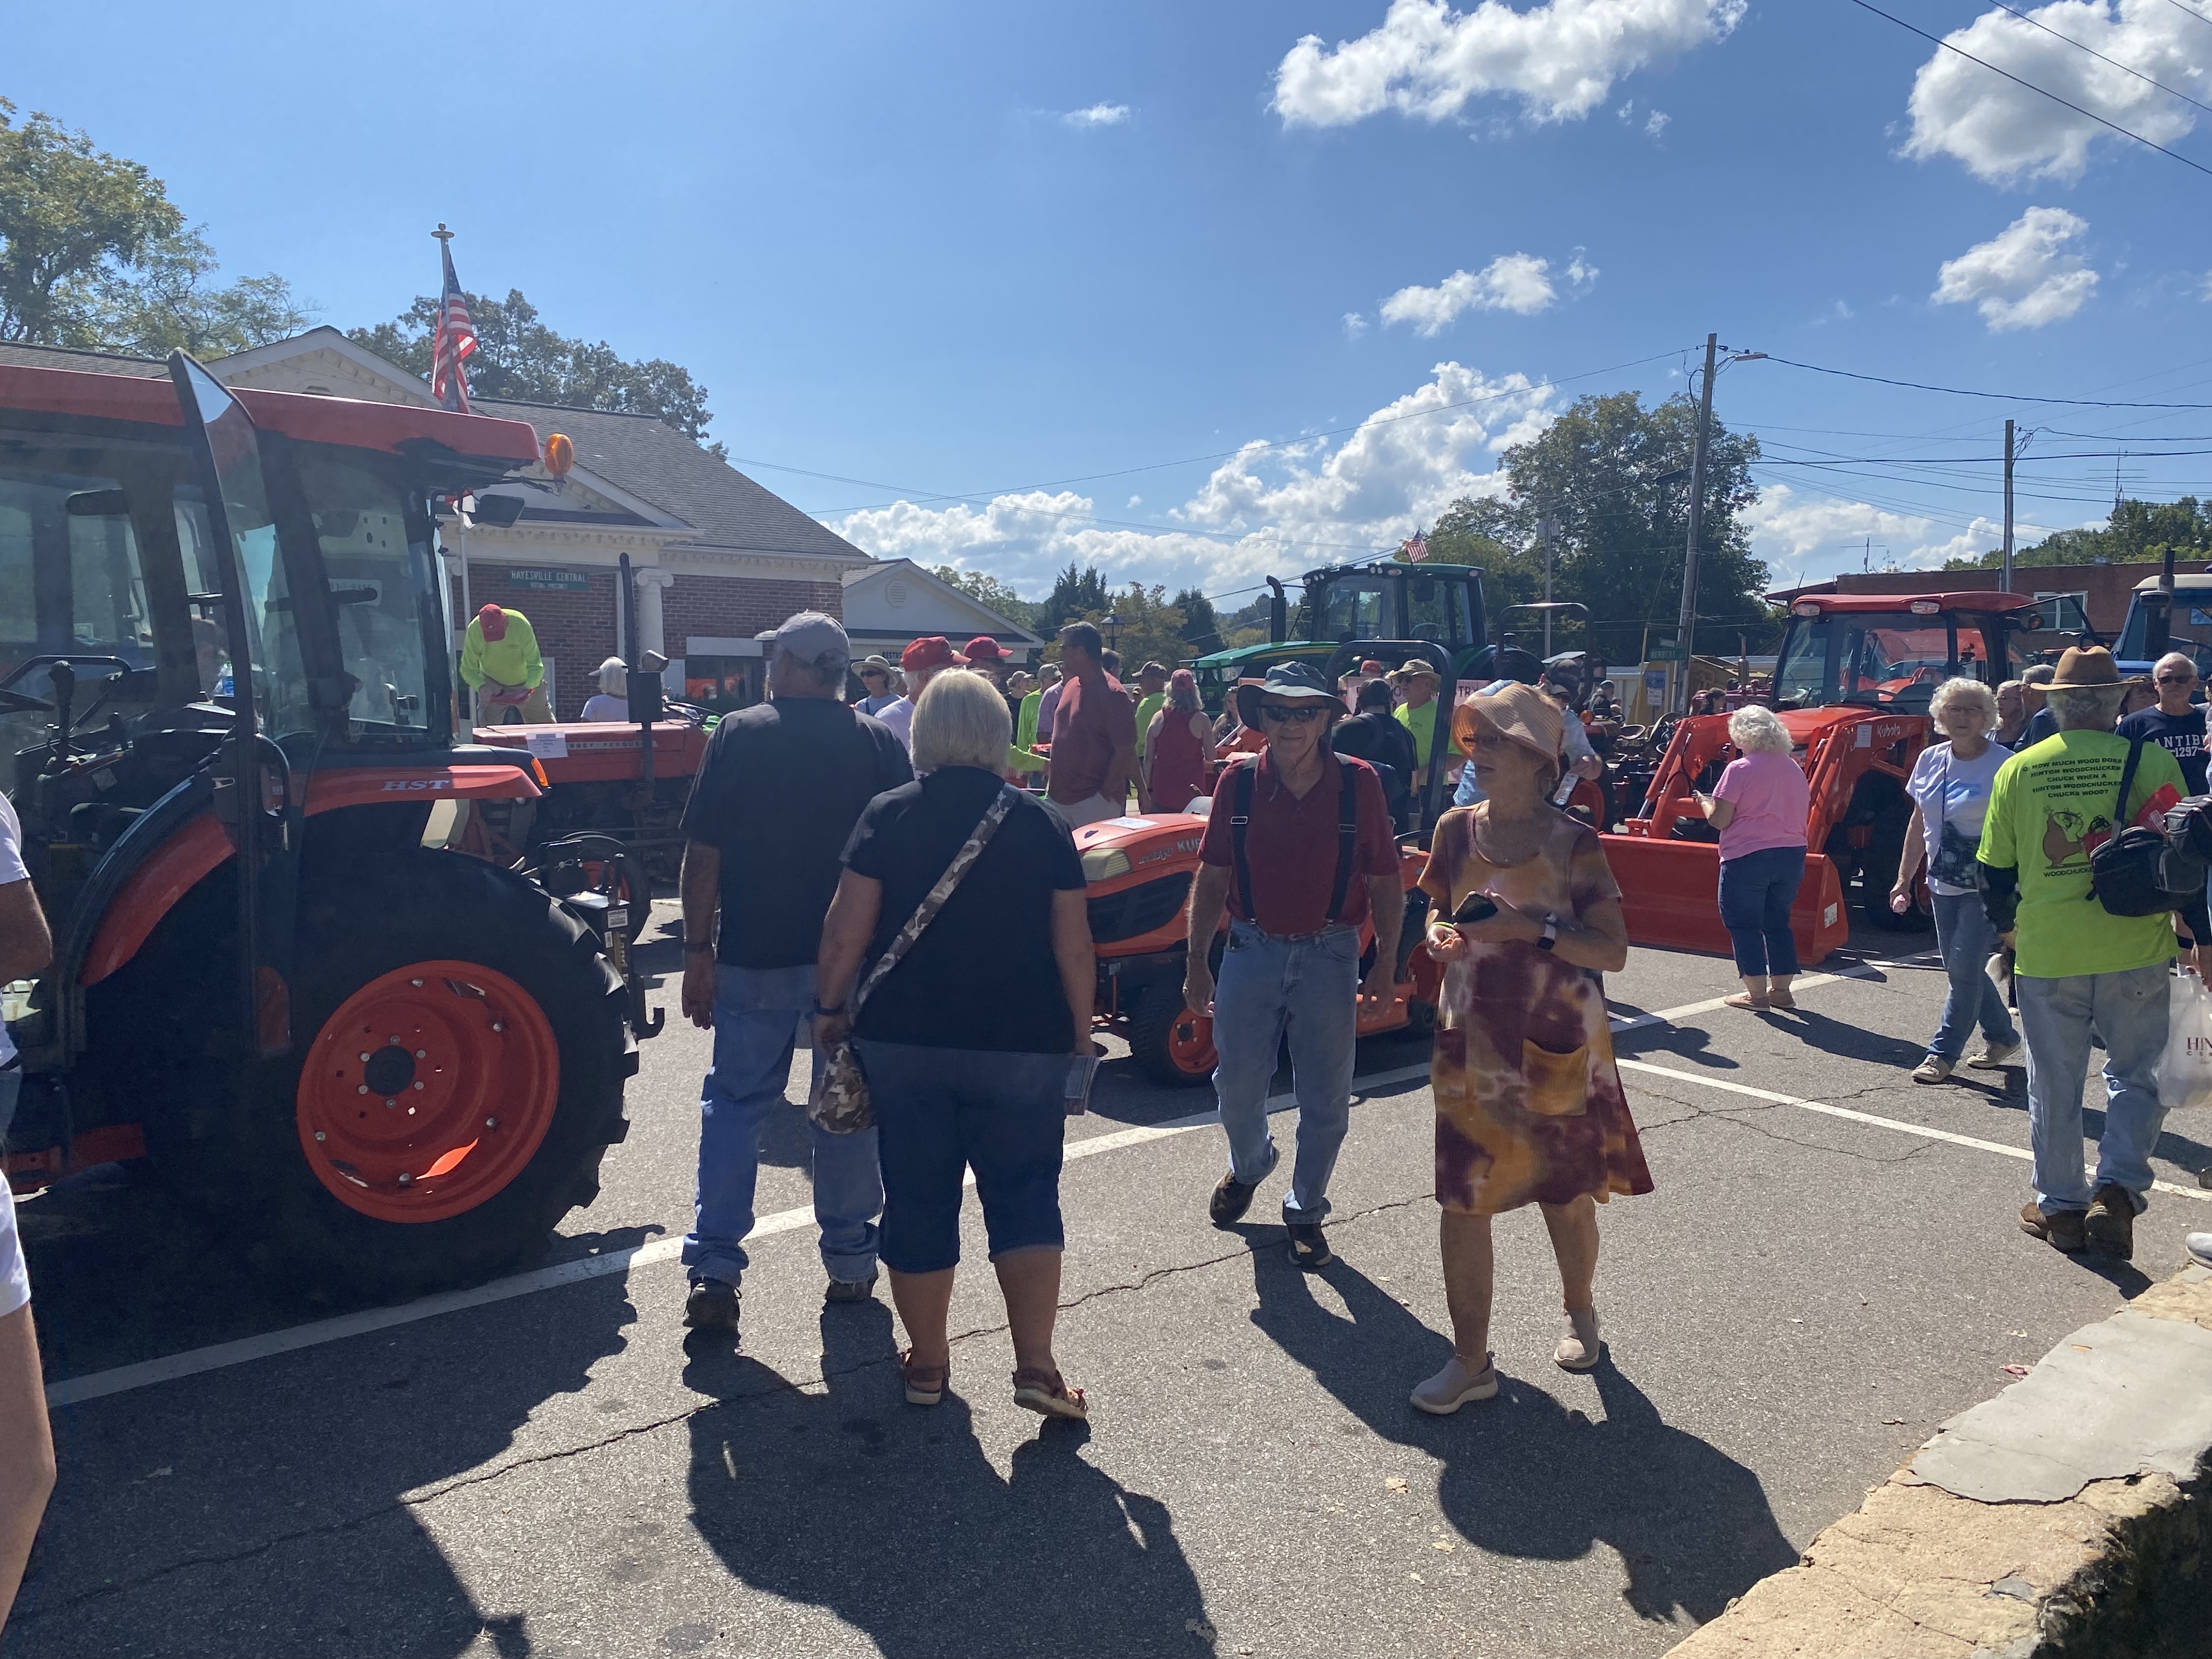 crowd and line of tractors